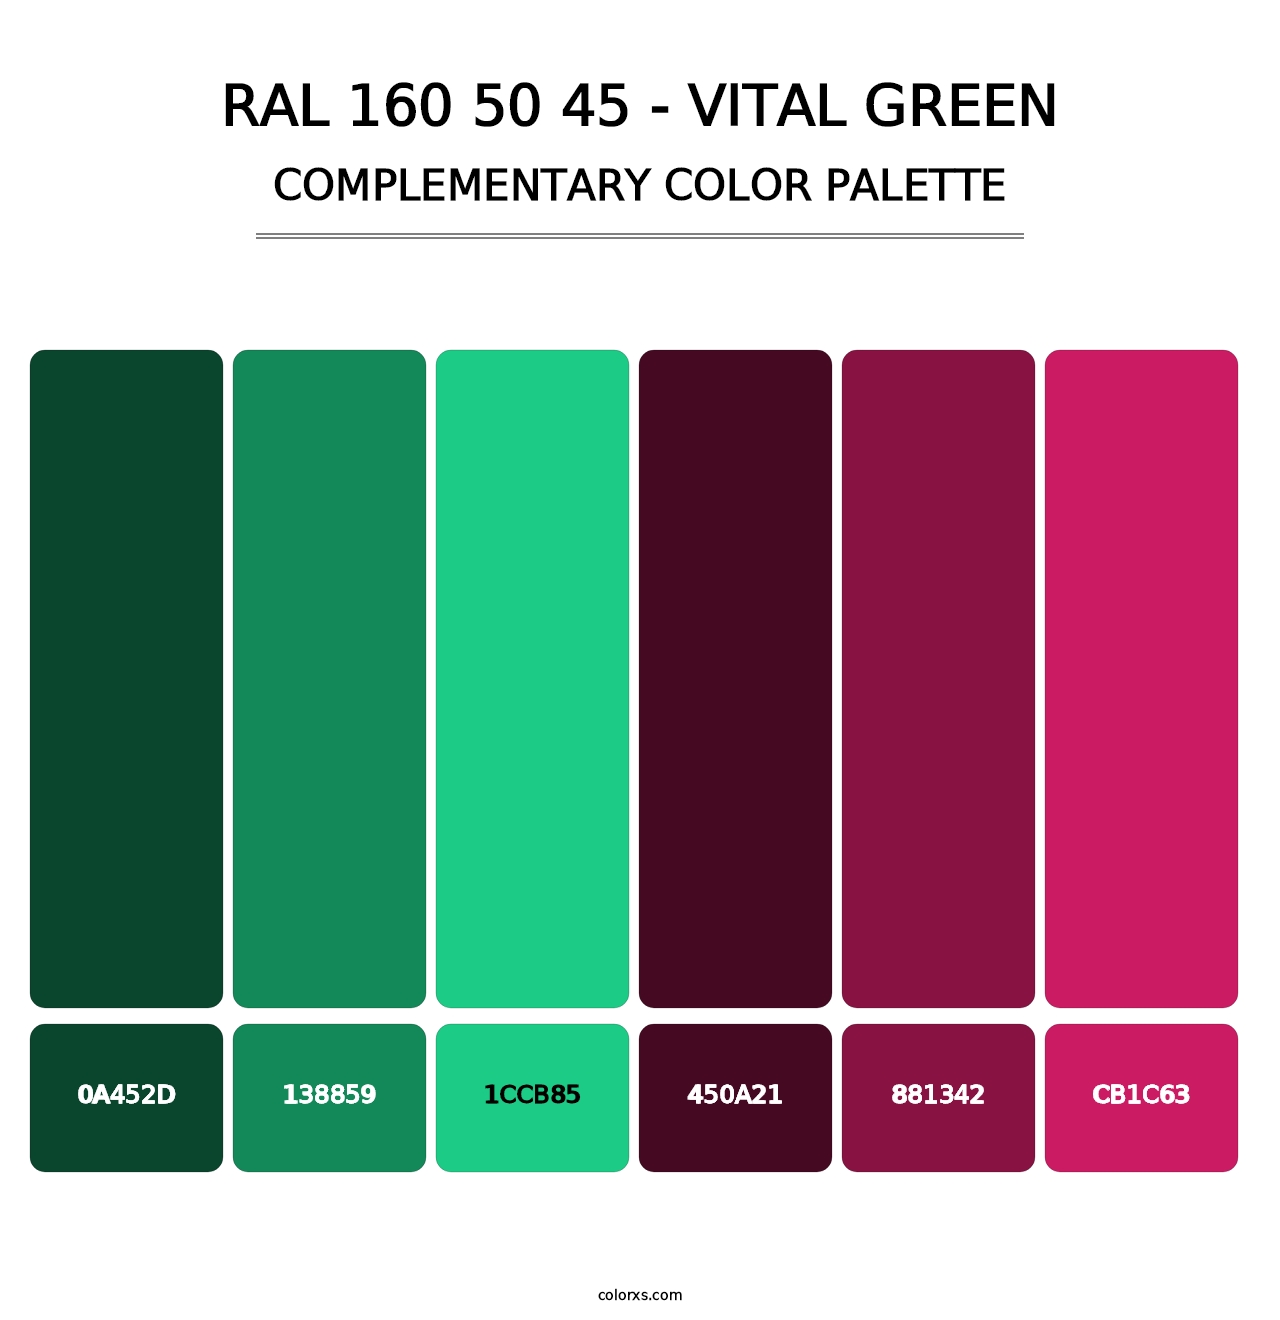 RAL 160 50 45 - Vital Green - Complementary Color Palette